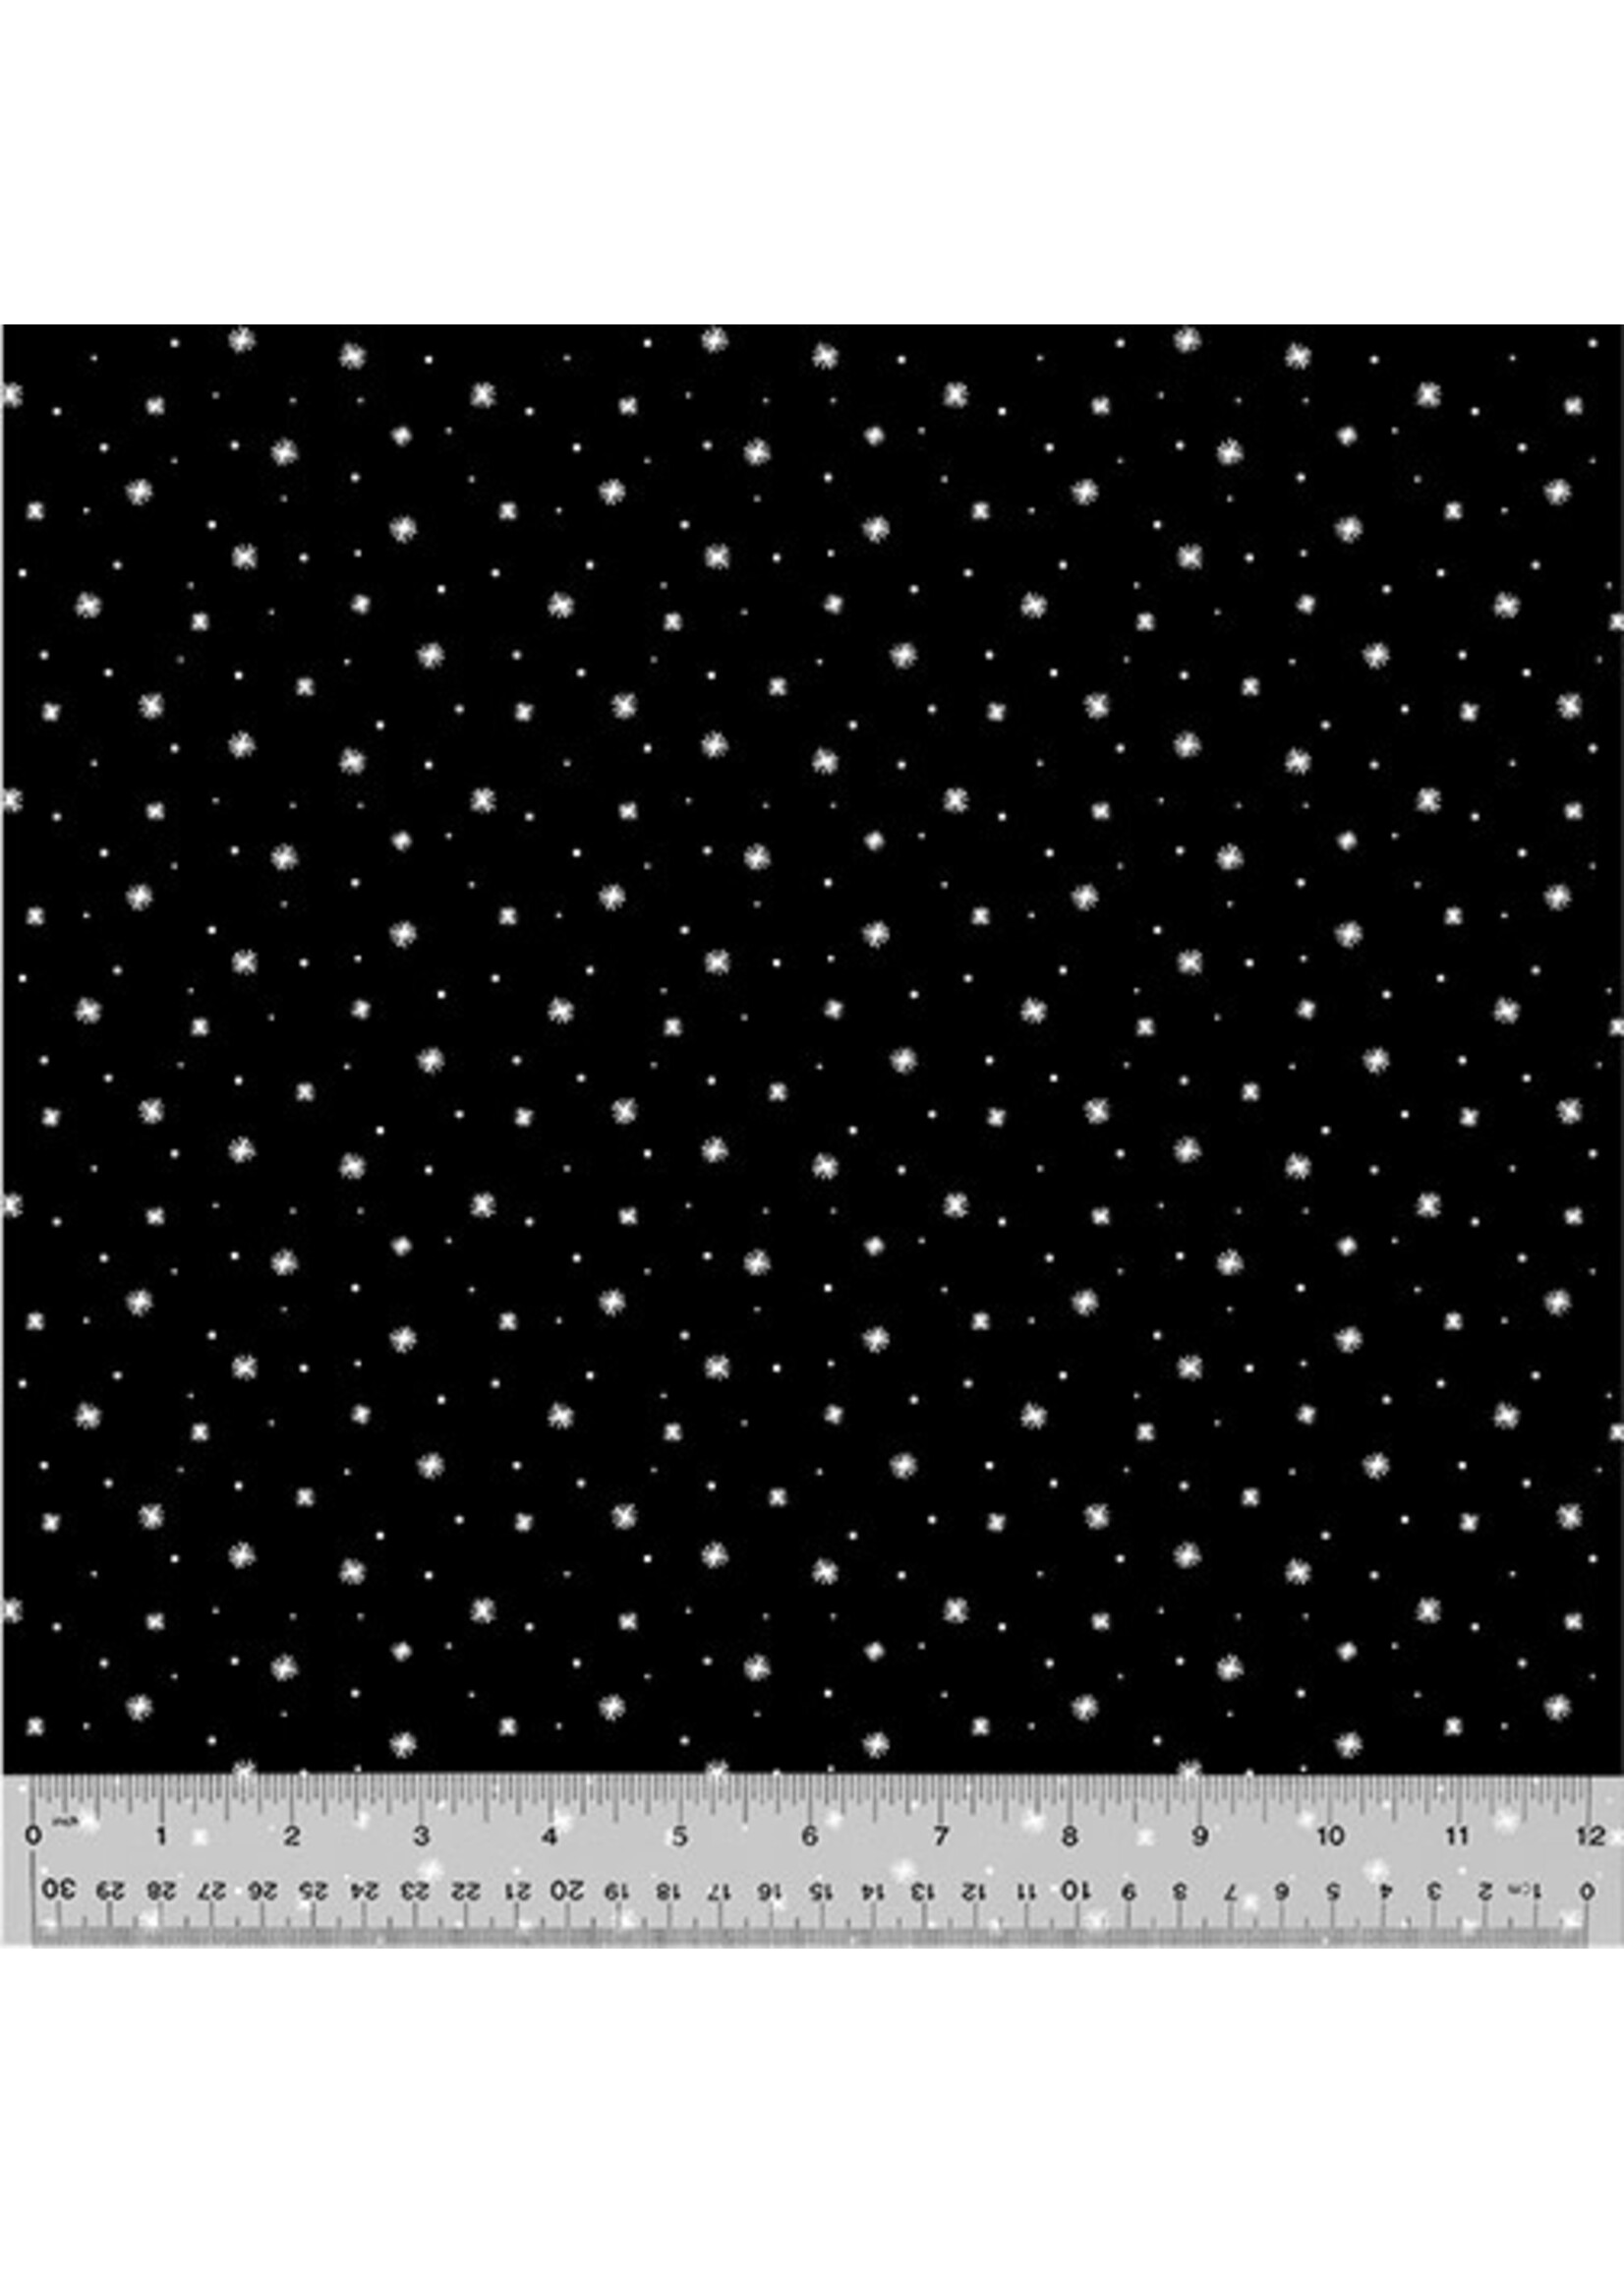 Windham Fabrics Pen and Ink - Twinkle - Black - 046